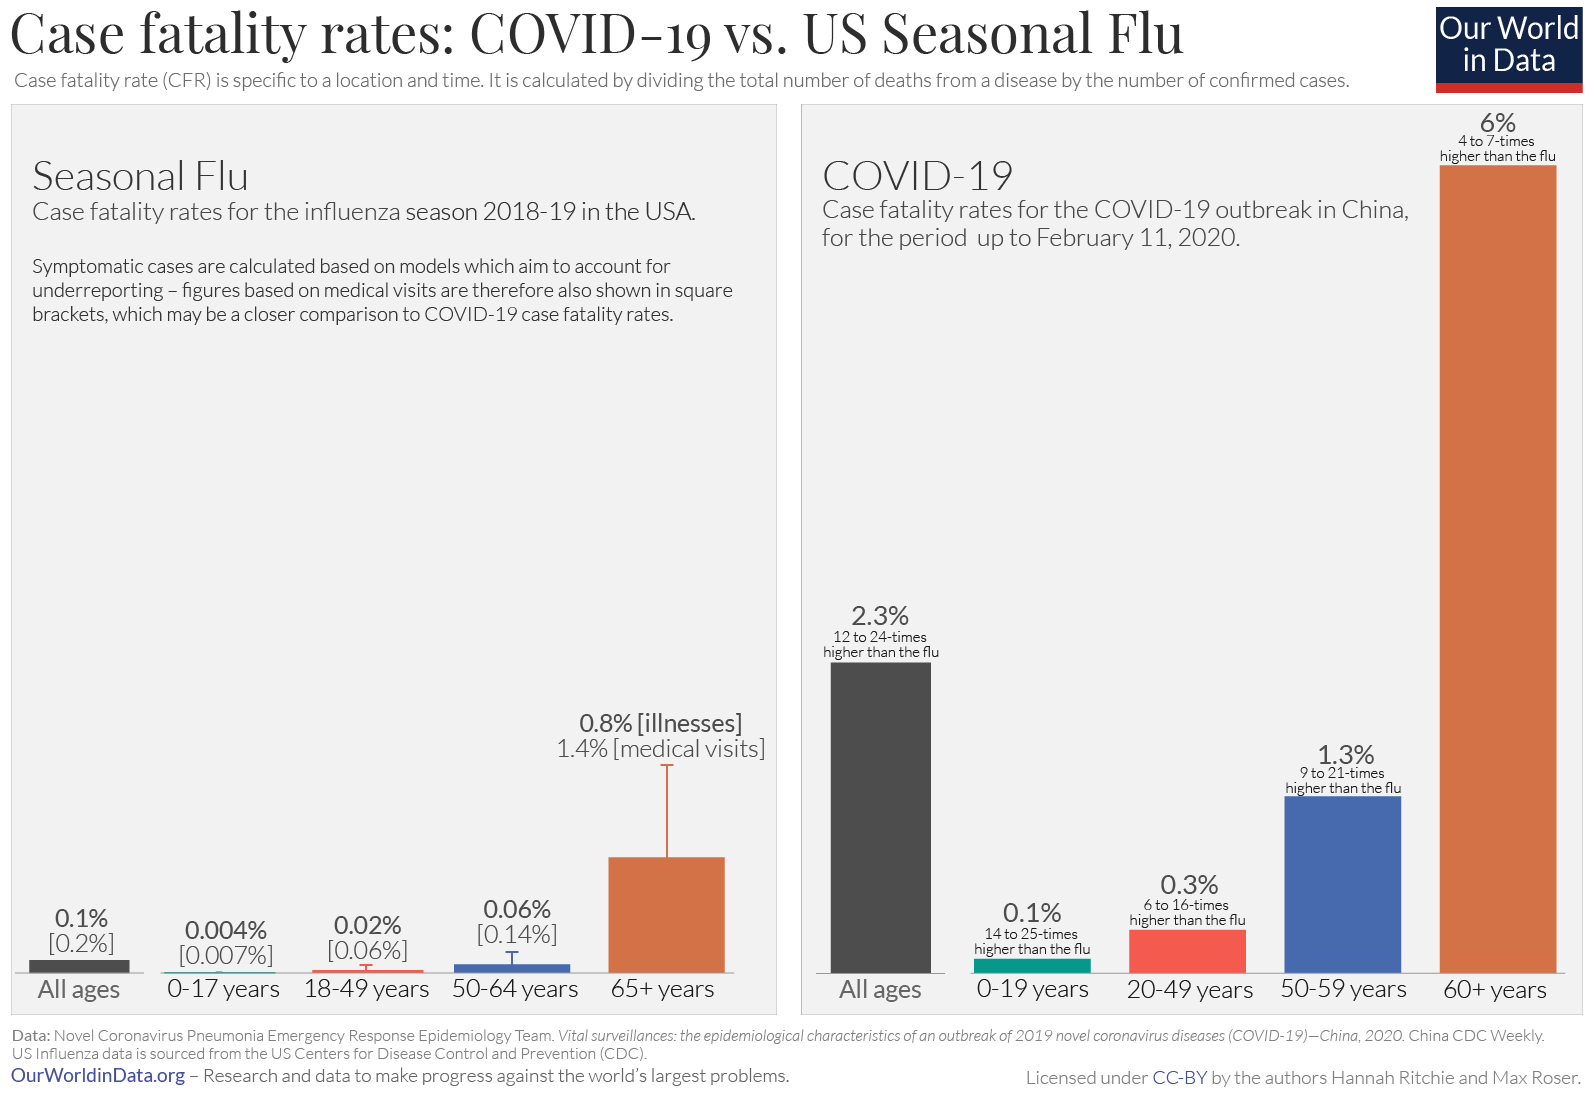 Comparison between COVID-19 and US seasonal flue in terms of case fatality rates